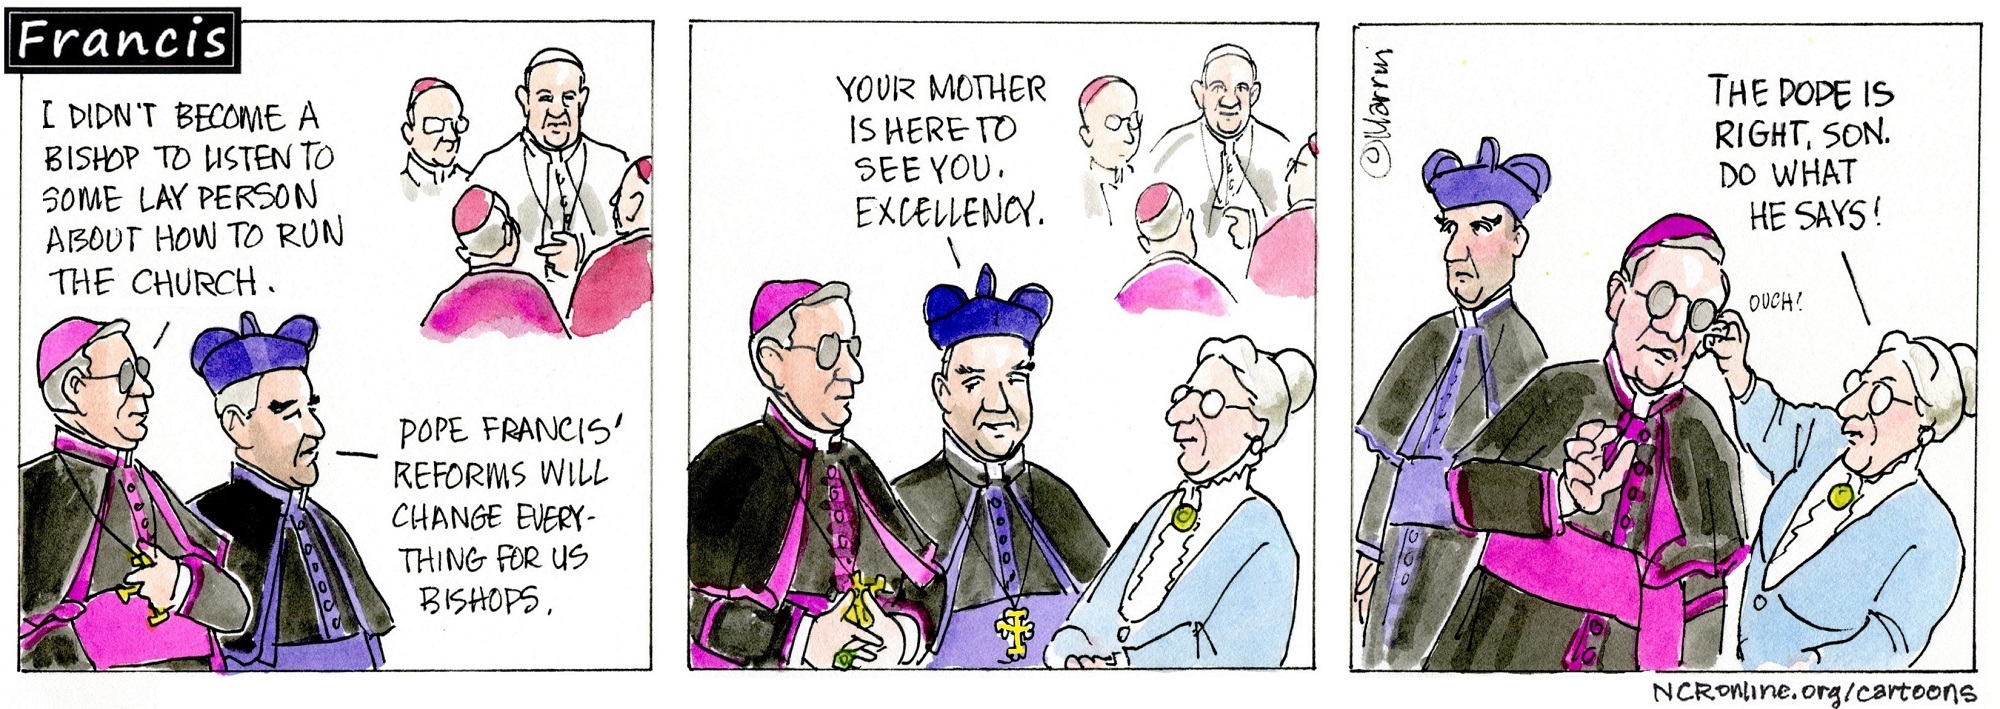 Francis, the comic strip: A bishop doesn't like Francis' reforms, but someone in authority has some advice.